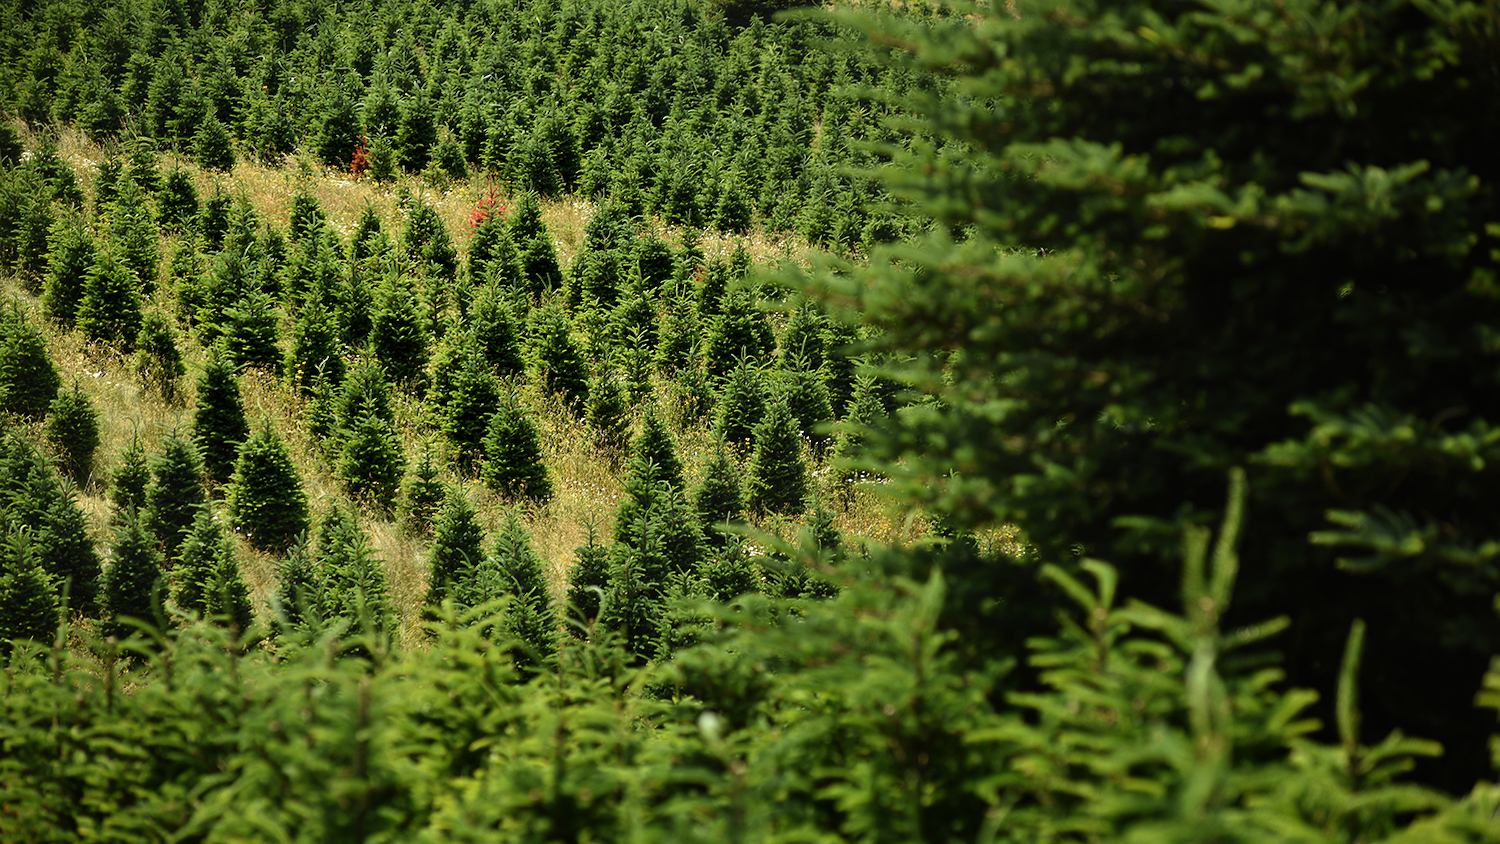 Christmas Tree Farm - Despite Shortage Fears, There Are Enough Real Christmas Trees for Everyone This Year - College of Natural Resources News - NC State University